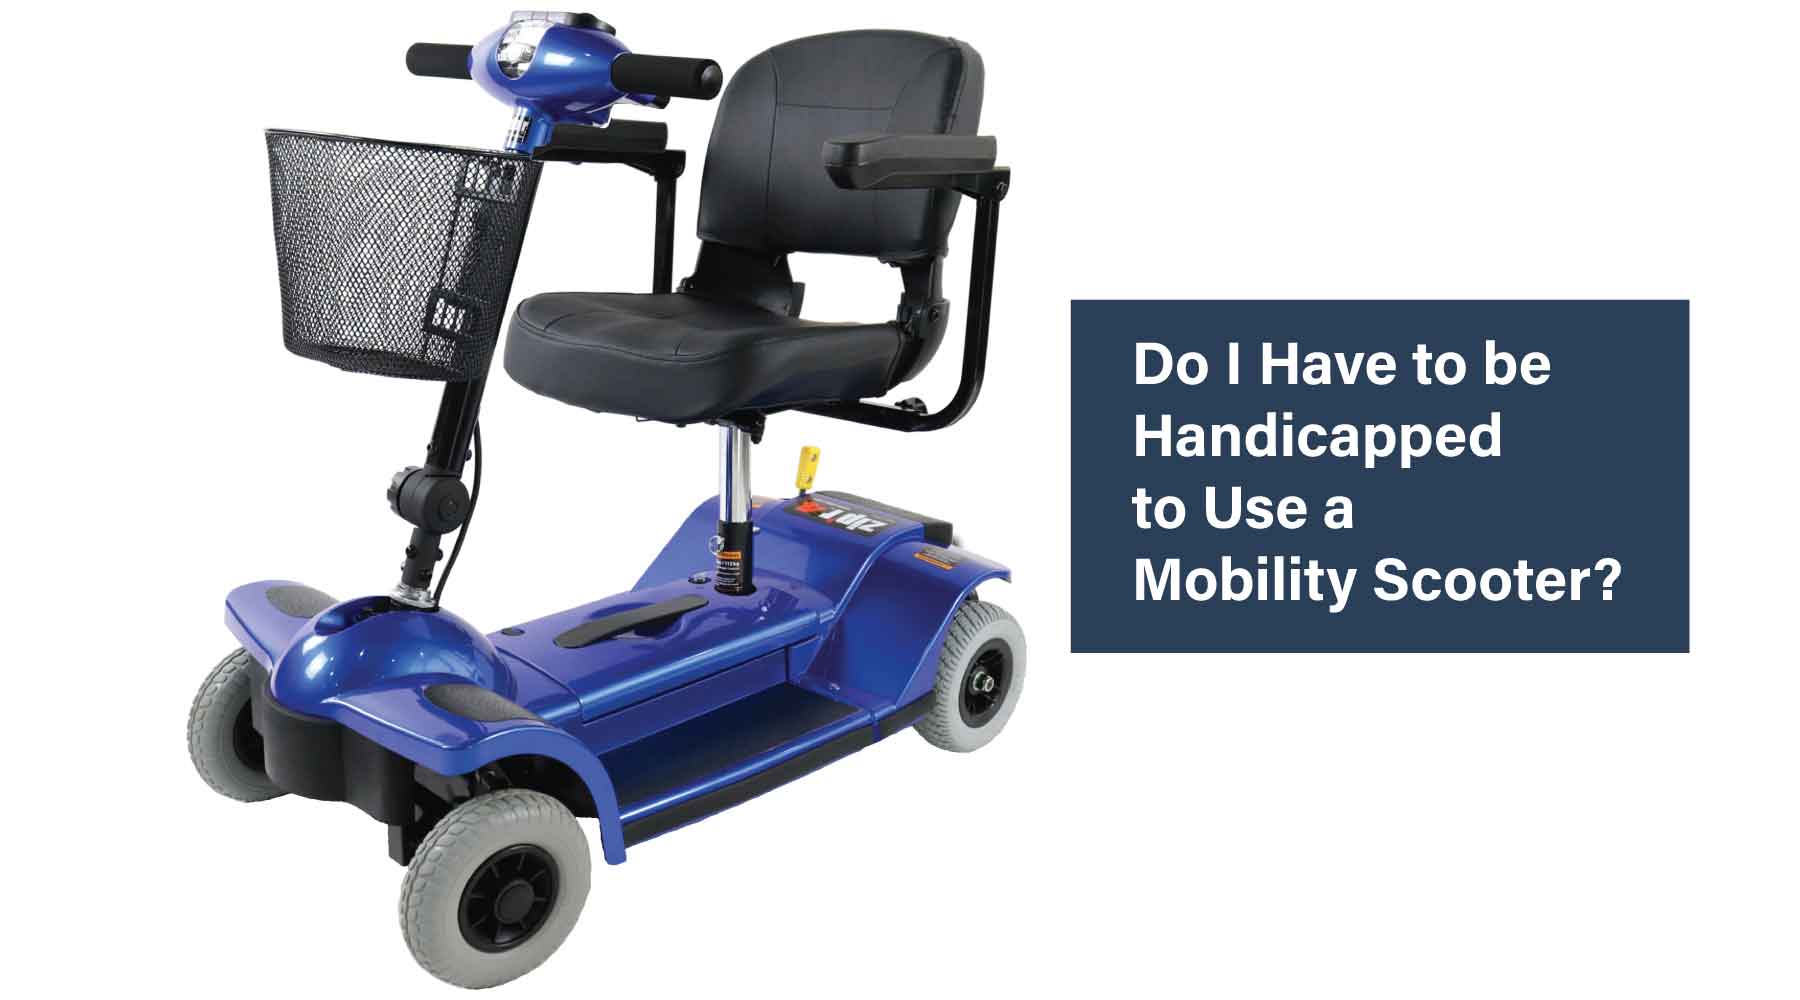 Do I Have to be Handicapped to Use a Mobility Scooter?